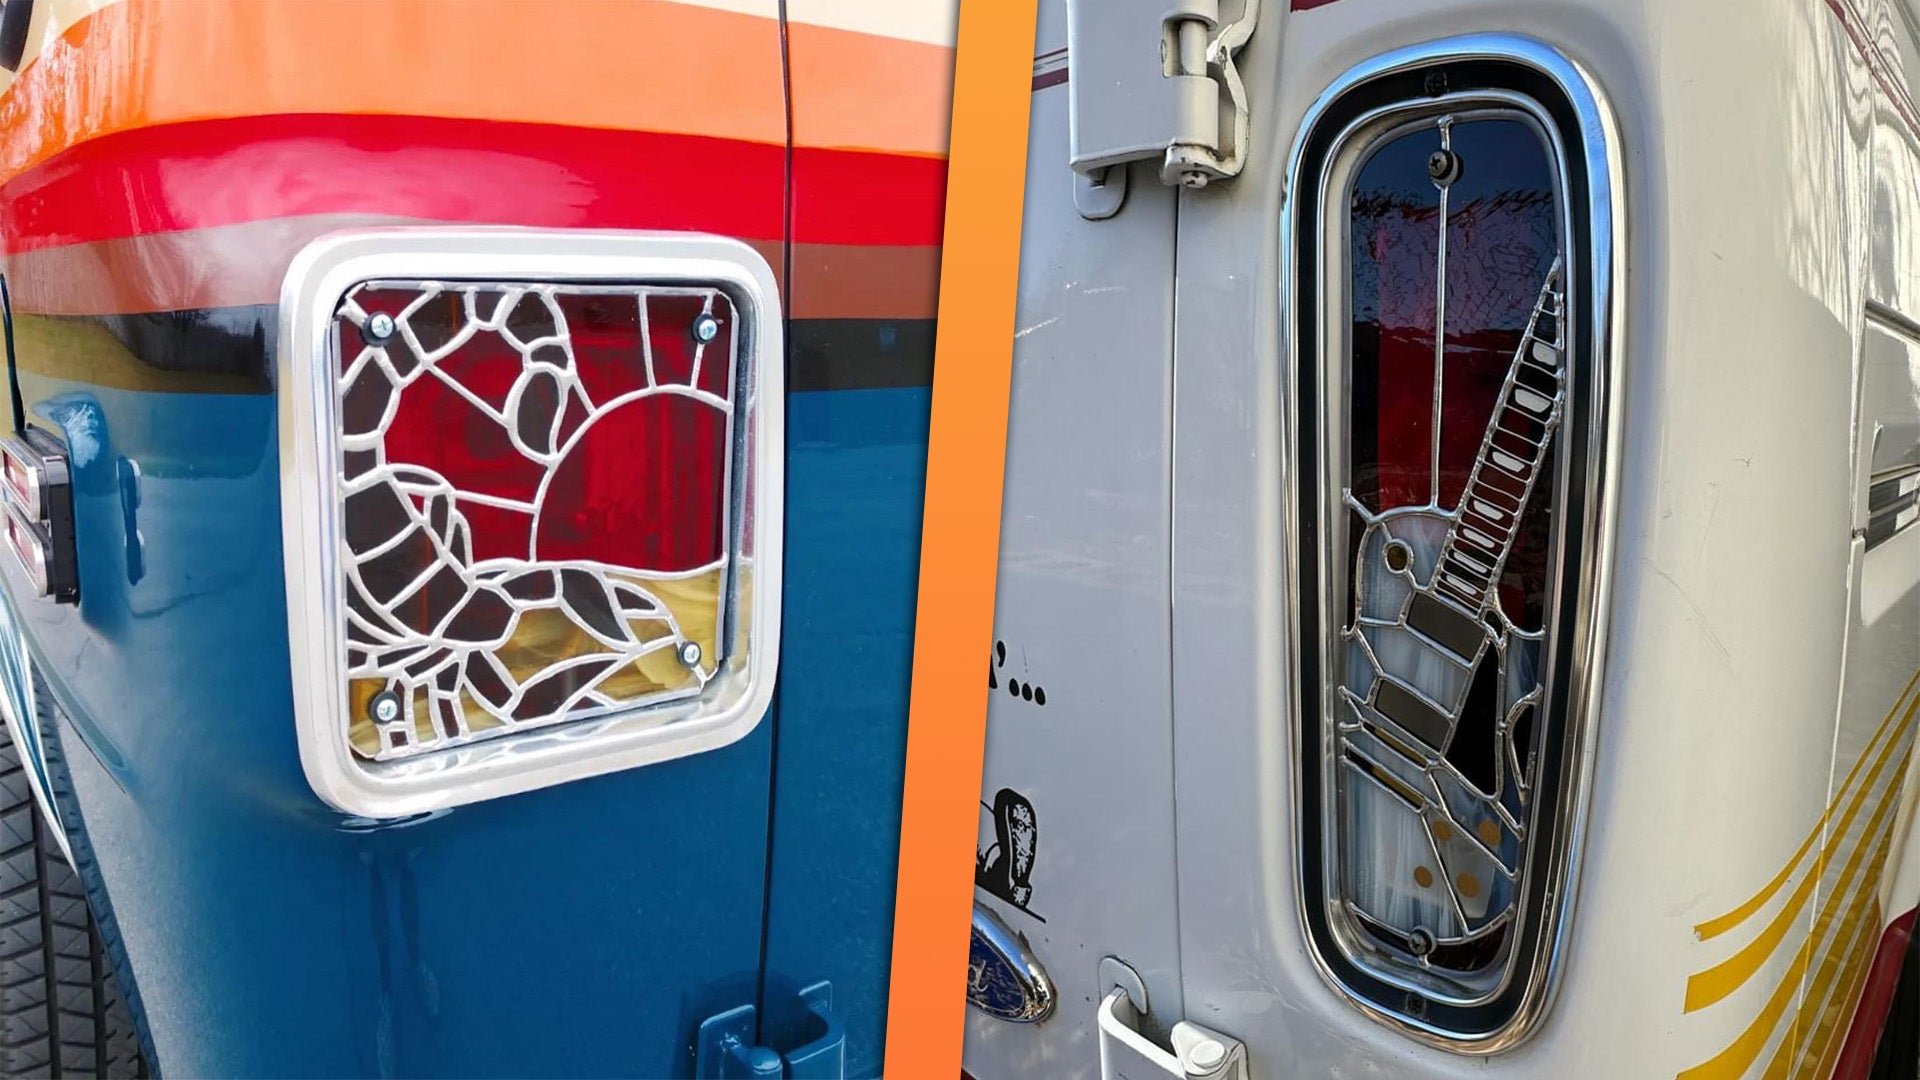 Automotive Art: Stained glass taillights on old vans and trucks 